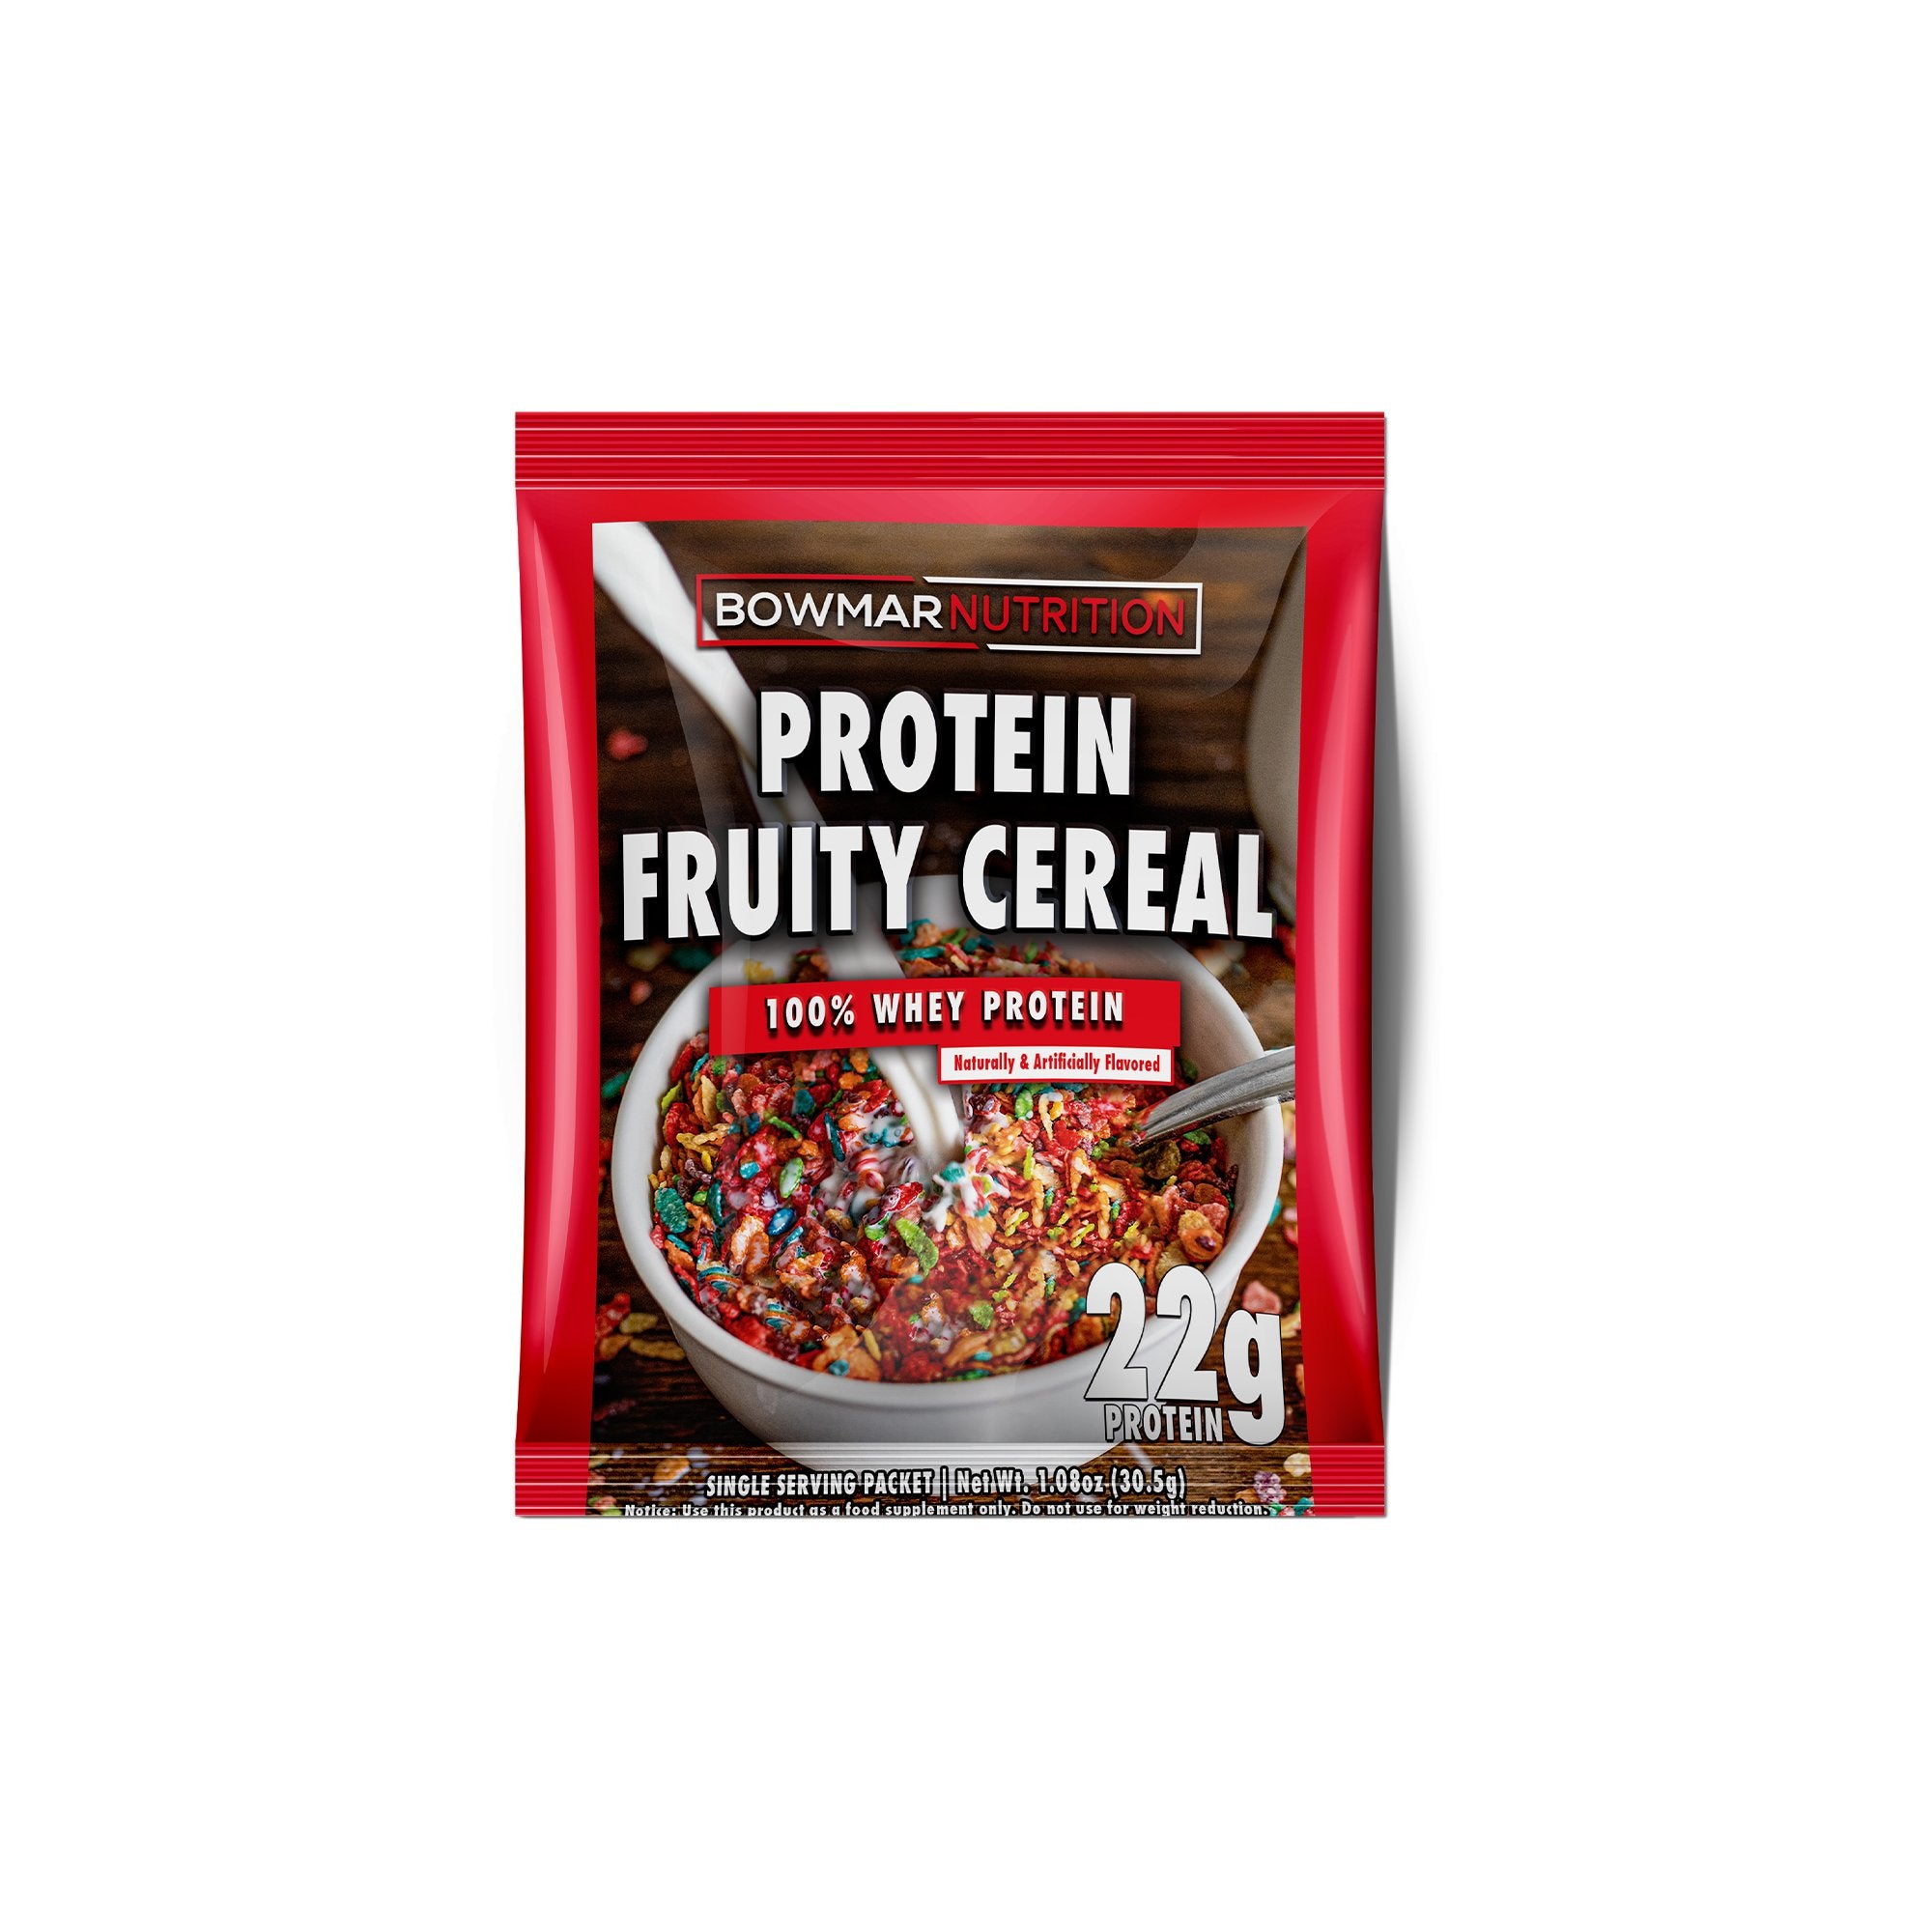 Bowmar Whey Protein Powder Sample (1 serving) bowmar-protein-powder-sachet-1-packet Protein Snacks Fruity Cereal bowmar